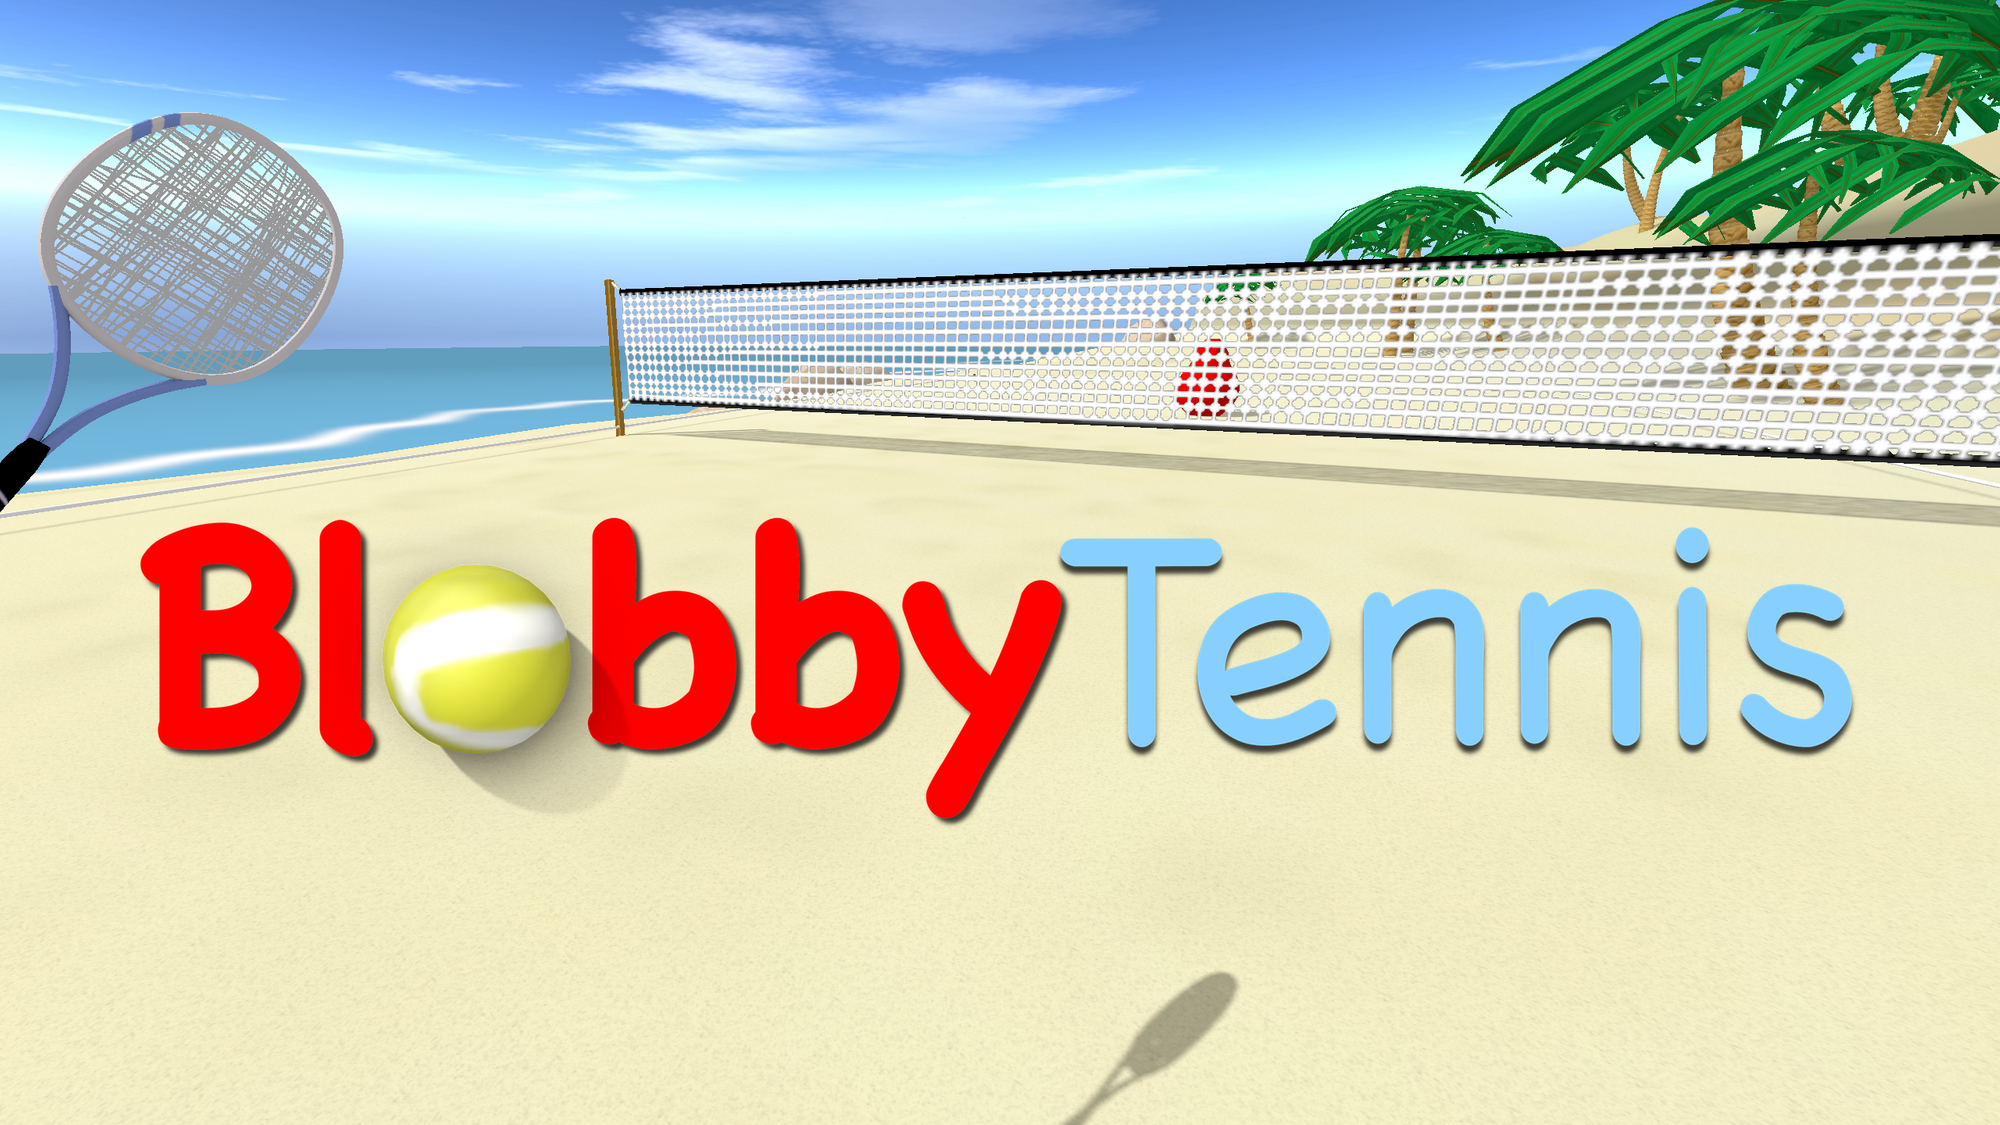 Blobby Tennis release for Oculus Quest